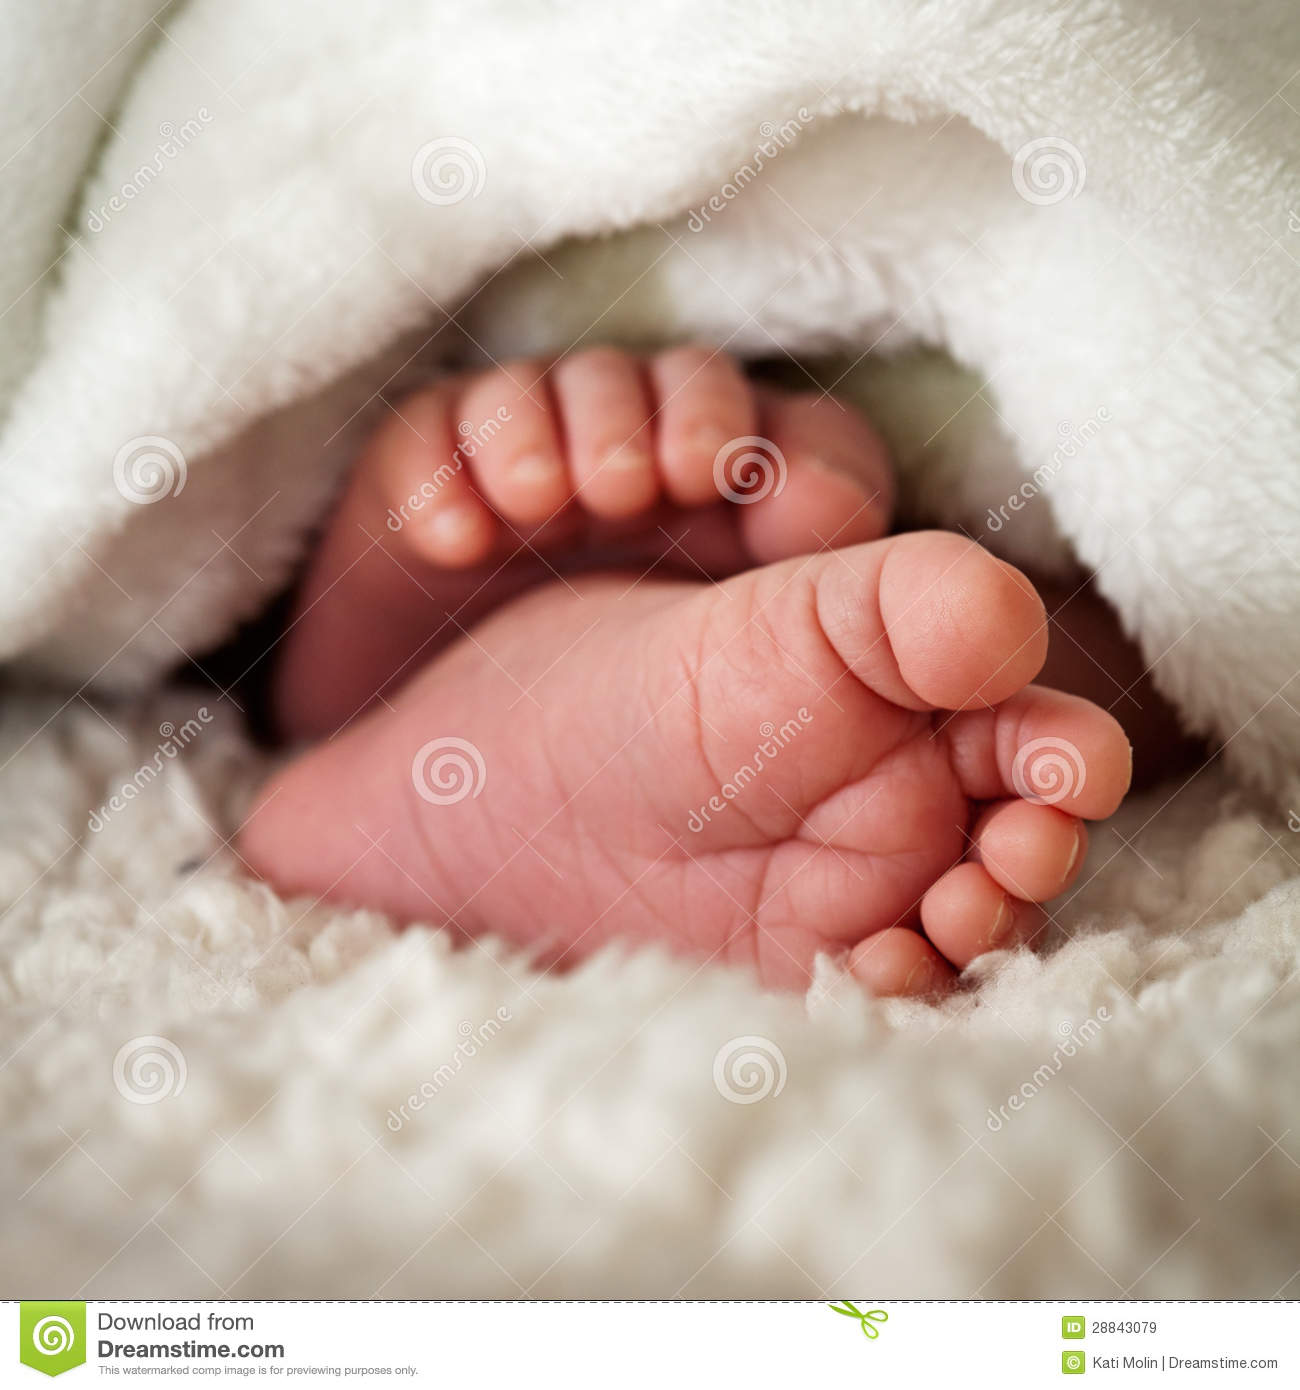 Baby Toes Royalty Free Stock Images   Image  28843079